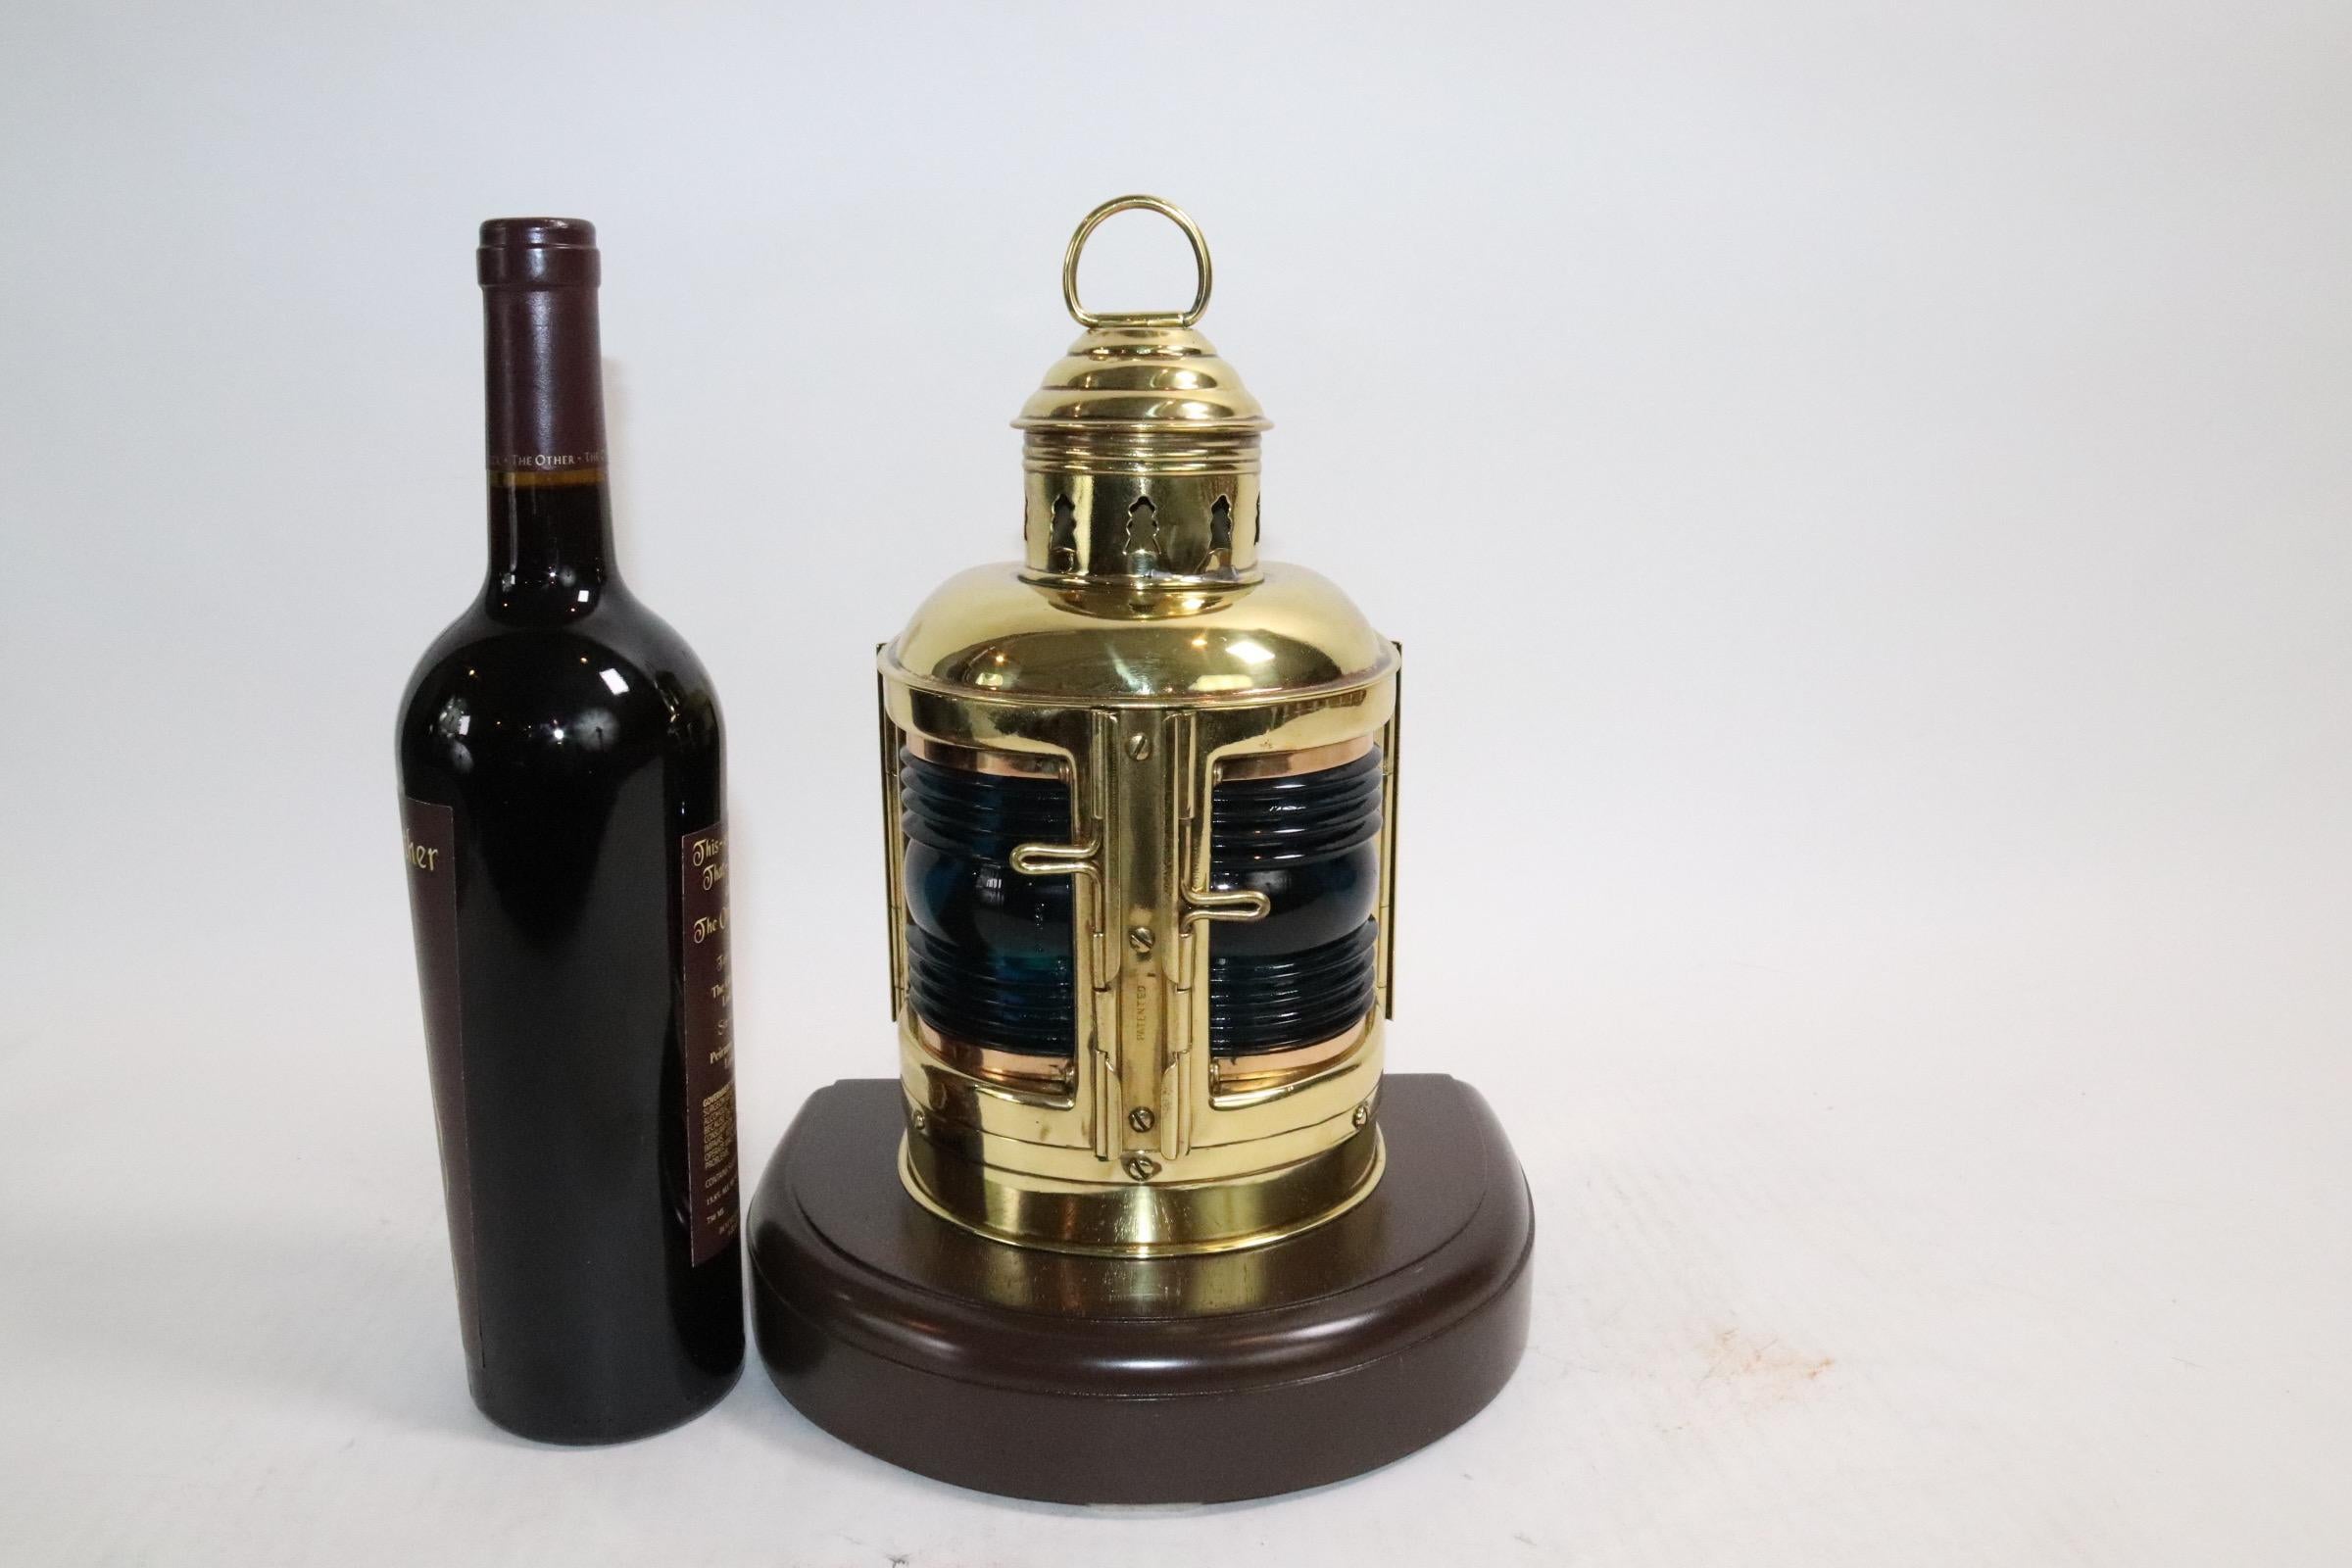 Highly polished and lacquered boat lantern by Perko. With original oil burner and wick. Fitted with two rich blue lenses and mounted to a thick wood base. Weight is 6 pounds.